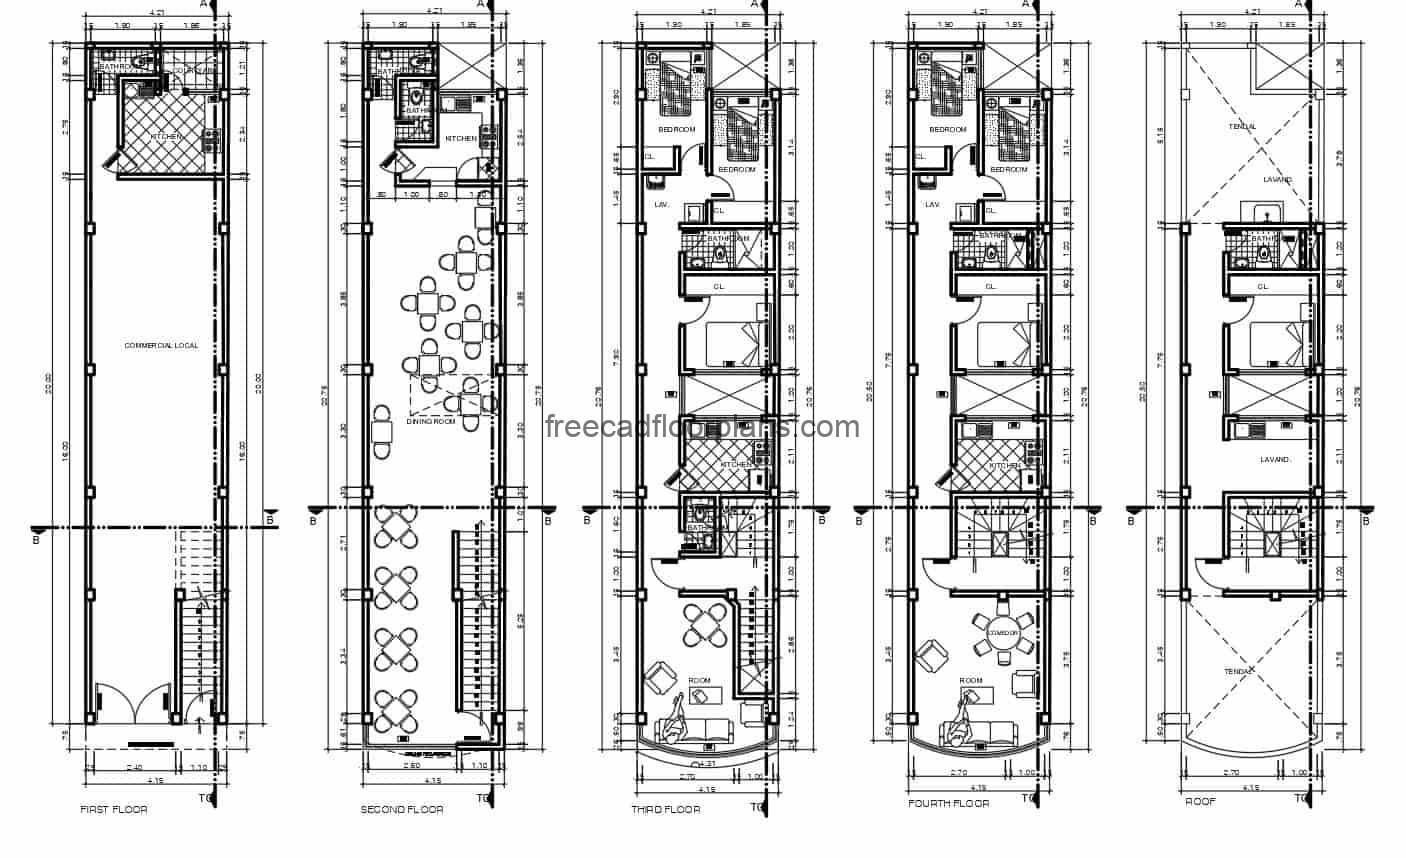 Complete architectural 2D DWG project of residential building plans of four levels in elongated contretto, architectural plans with dimensions, electrical, sanitary and structural plans, details of doors and windows, beams and columns in reinforced concrete. CAD floor plans DWG for free download